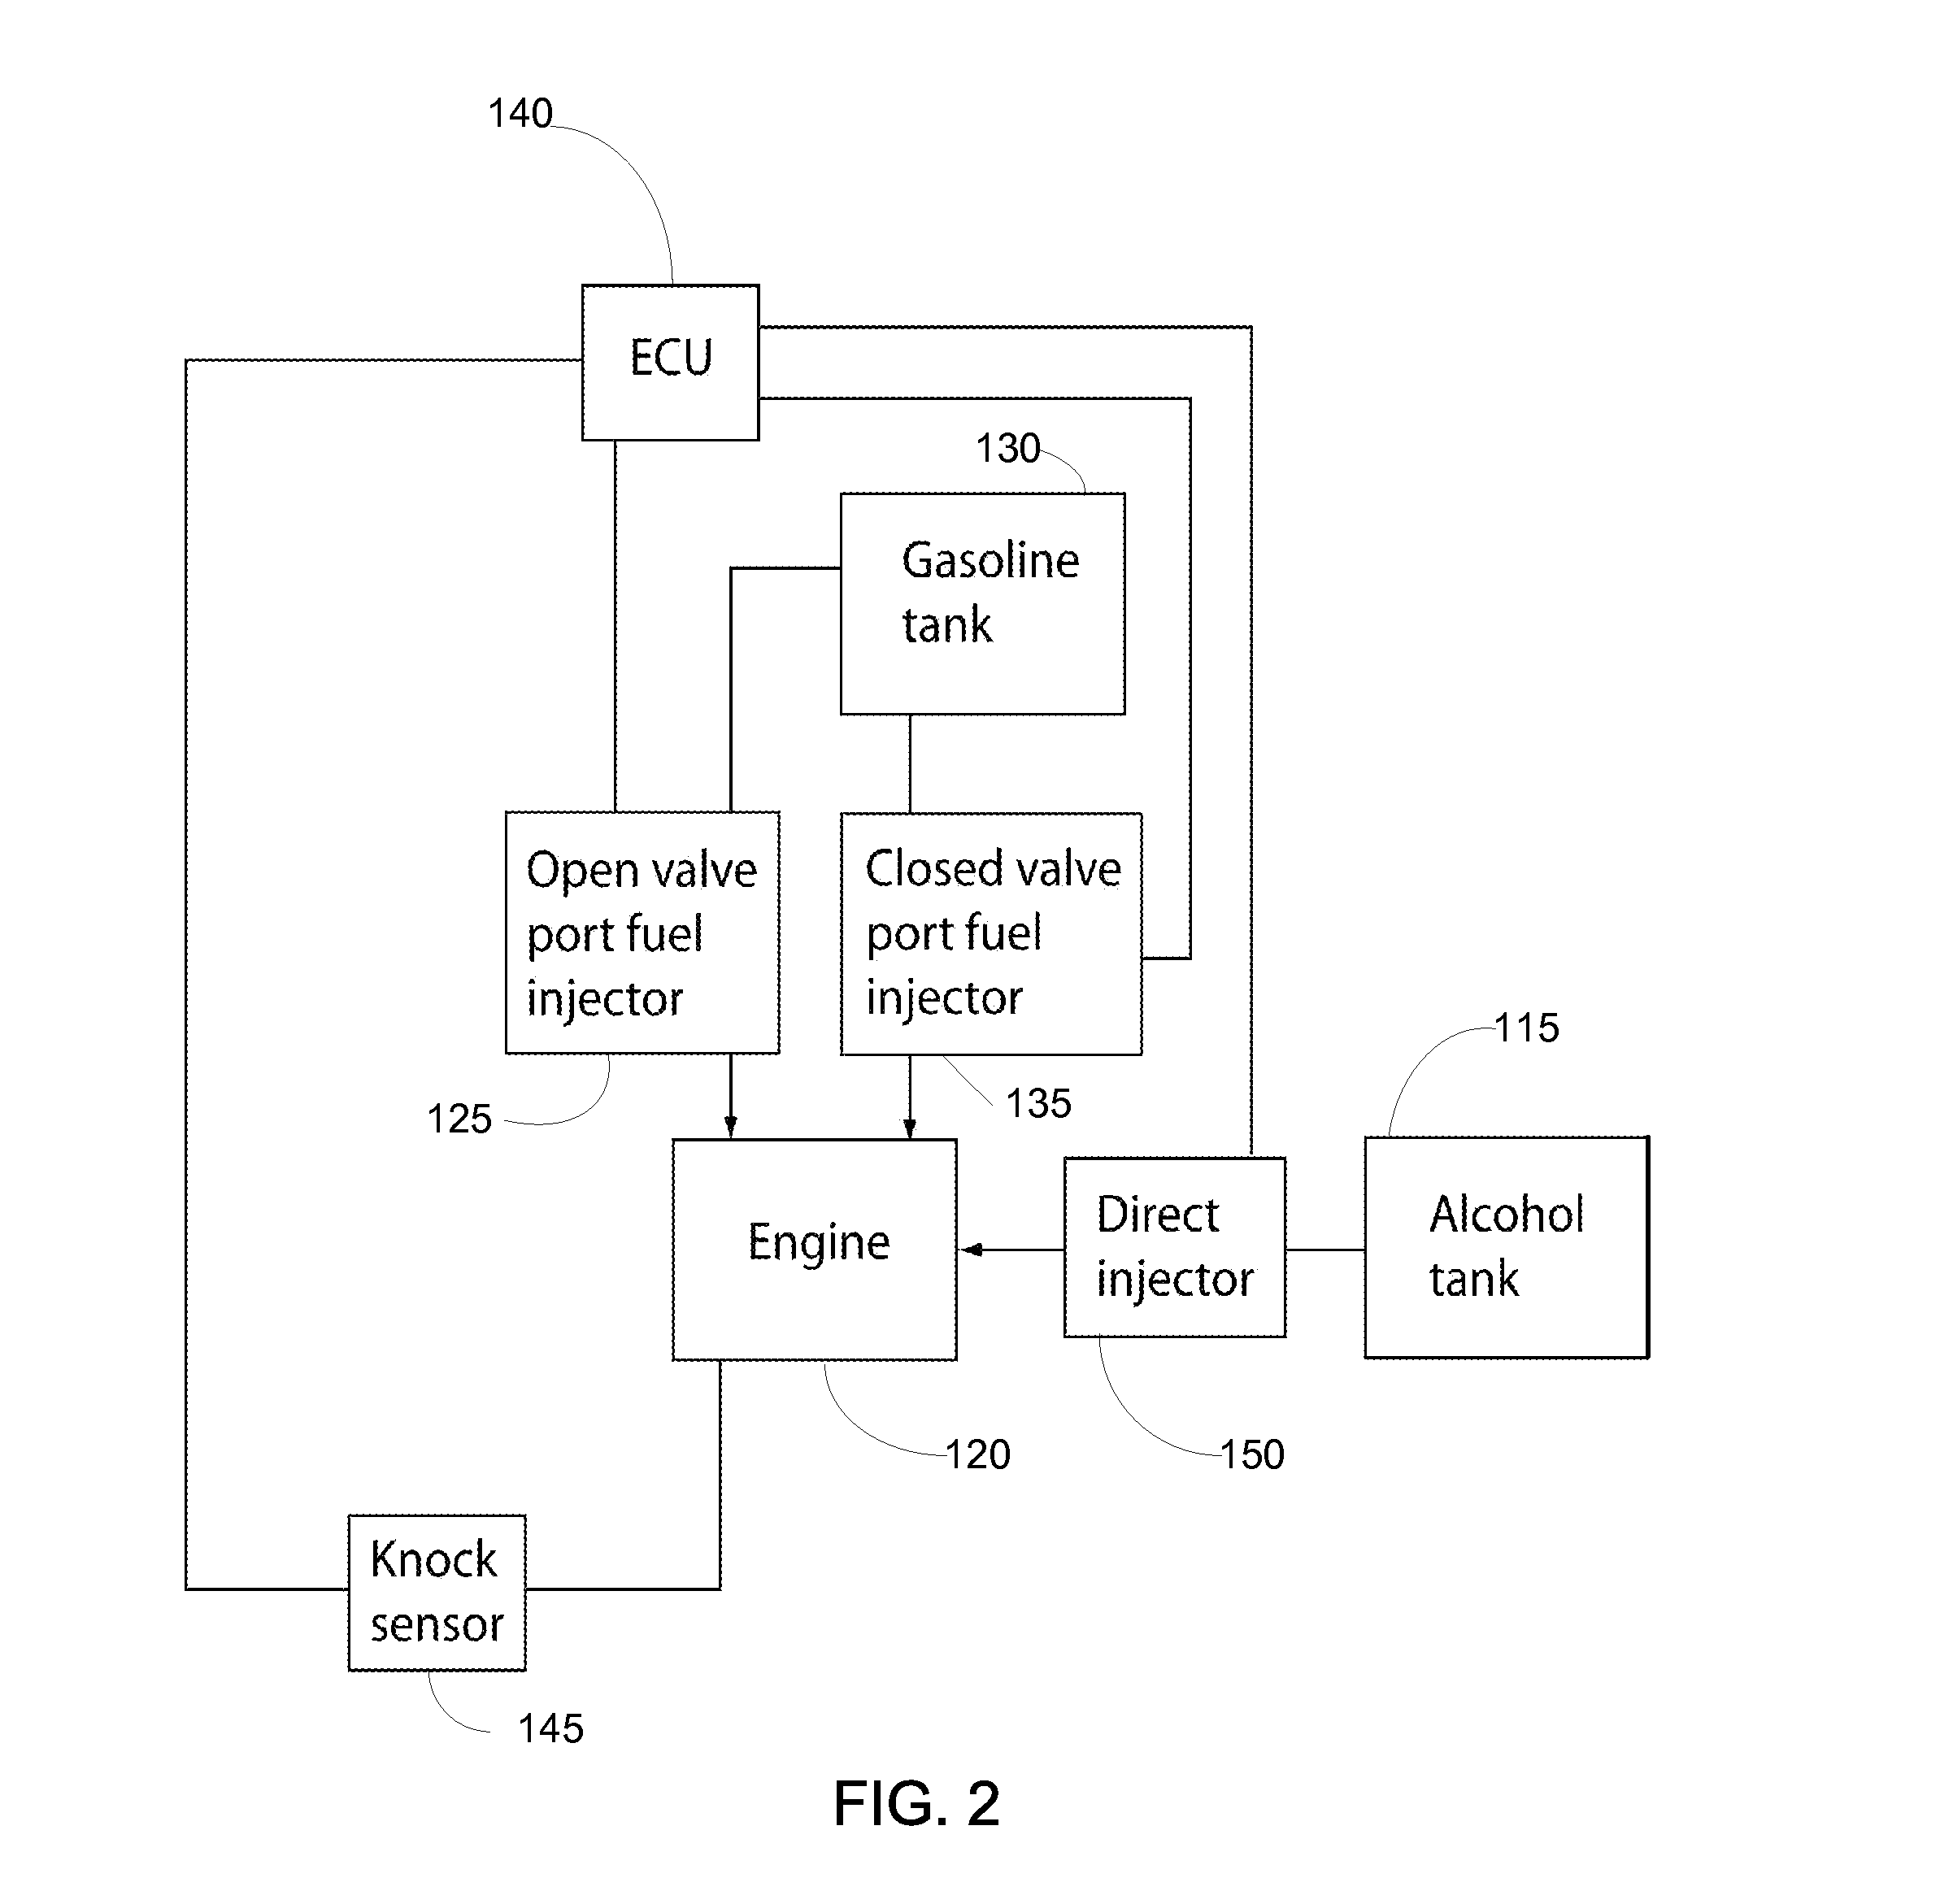 Open-valve Port Fuel Injection Of Alcohol In Multiple Injector Engines